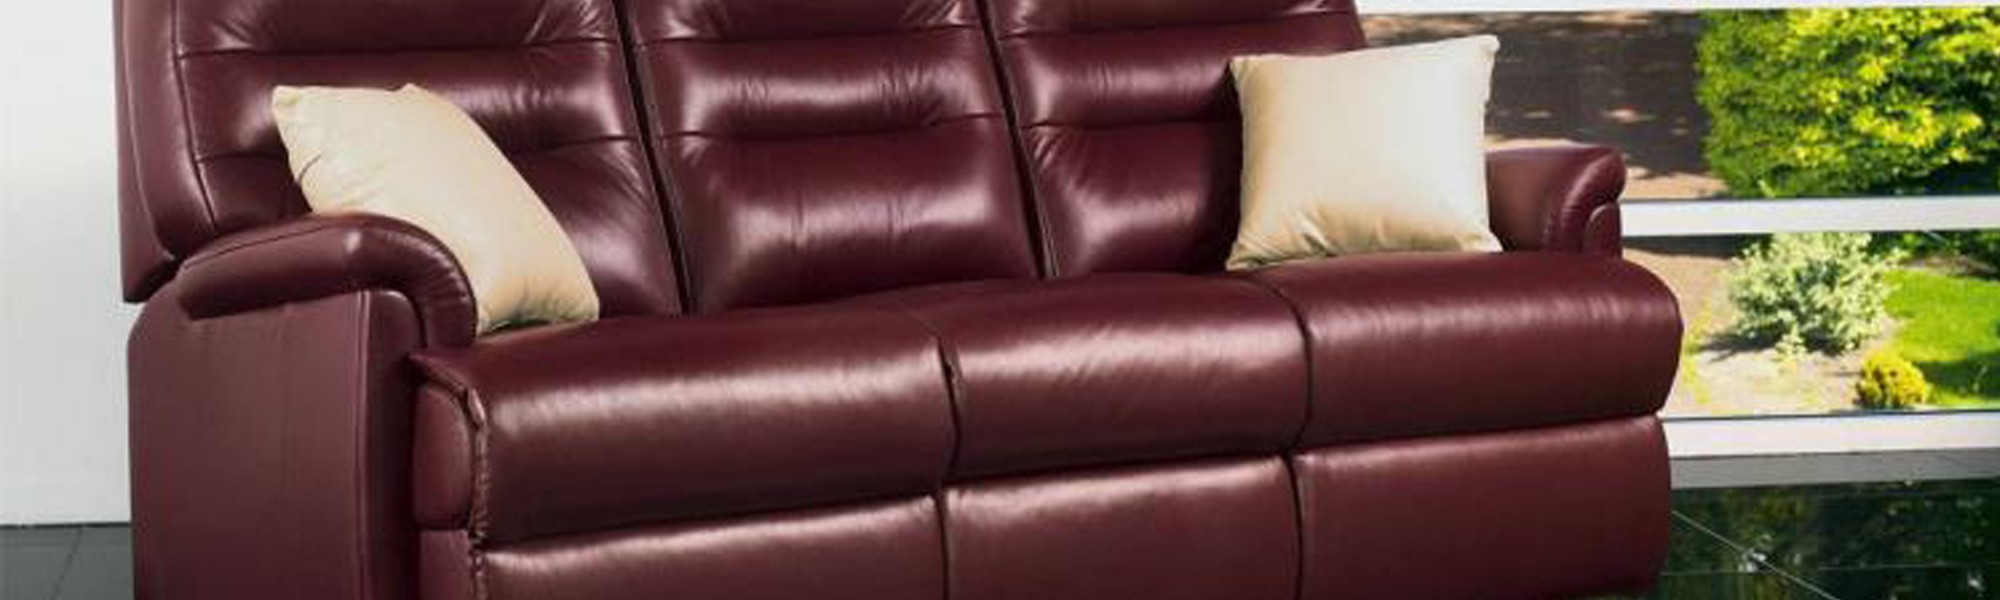 Leather 3 Seater Sofas | Brown, Grey & Cream